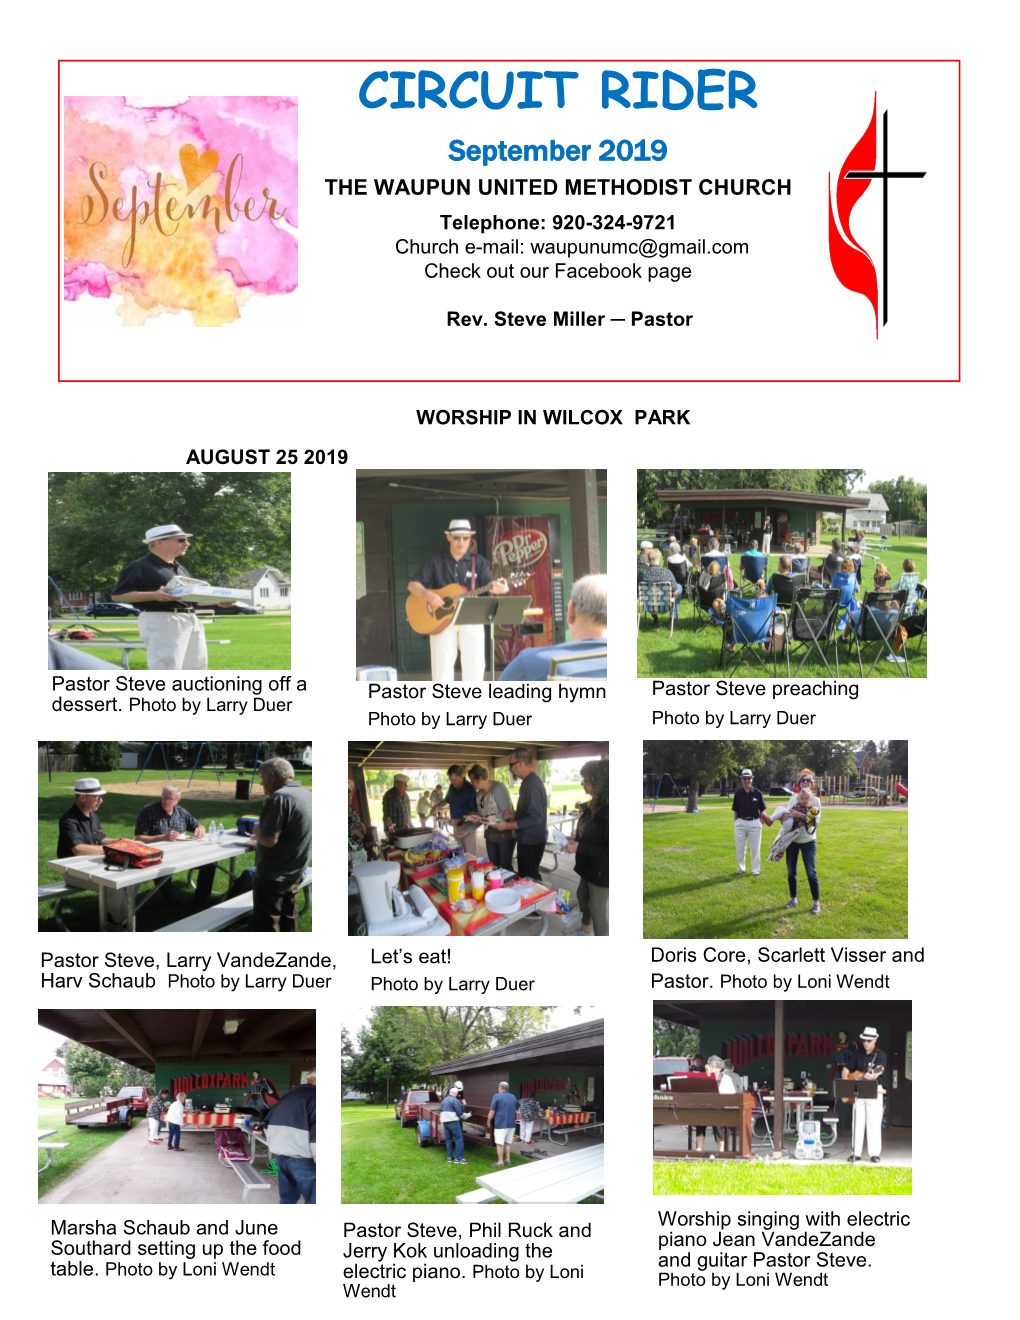 CIRCUIT RIDER September 2019 the WAUPUN UNITED METHODIST CHURCH Telephone: 920-324-9721 Church E-Mail: Waupunumc@Gmail.Com Check out Our Facebook Page